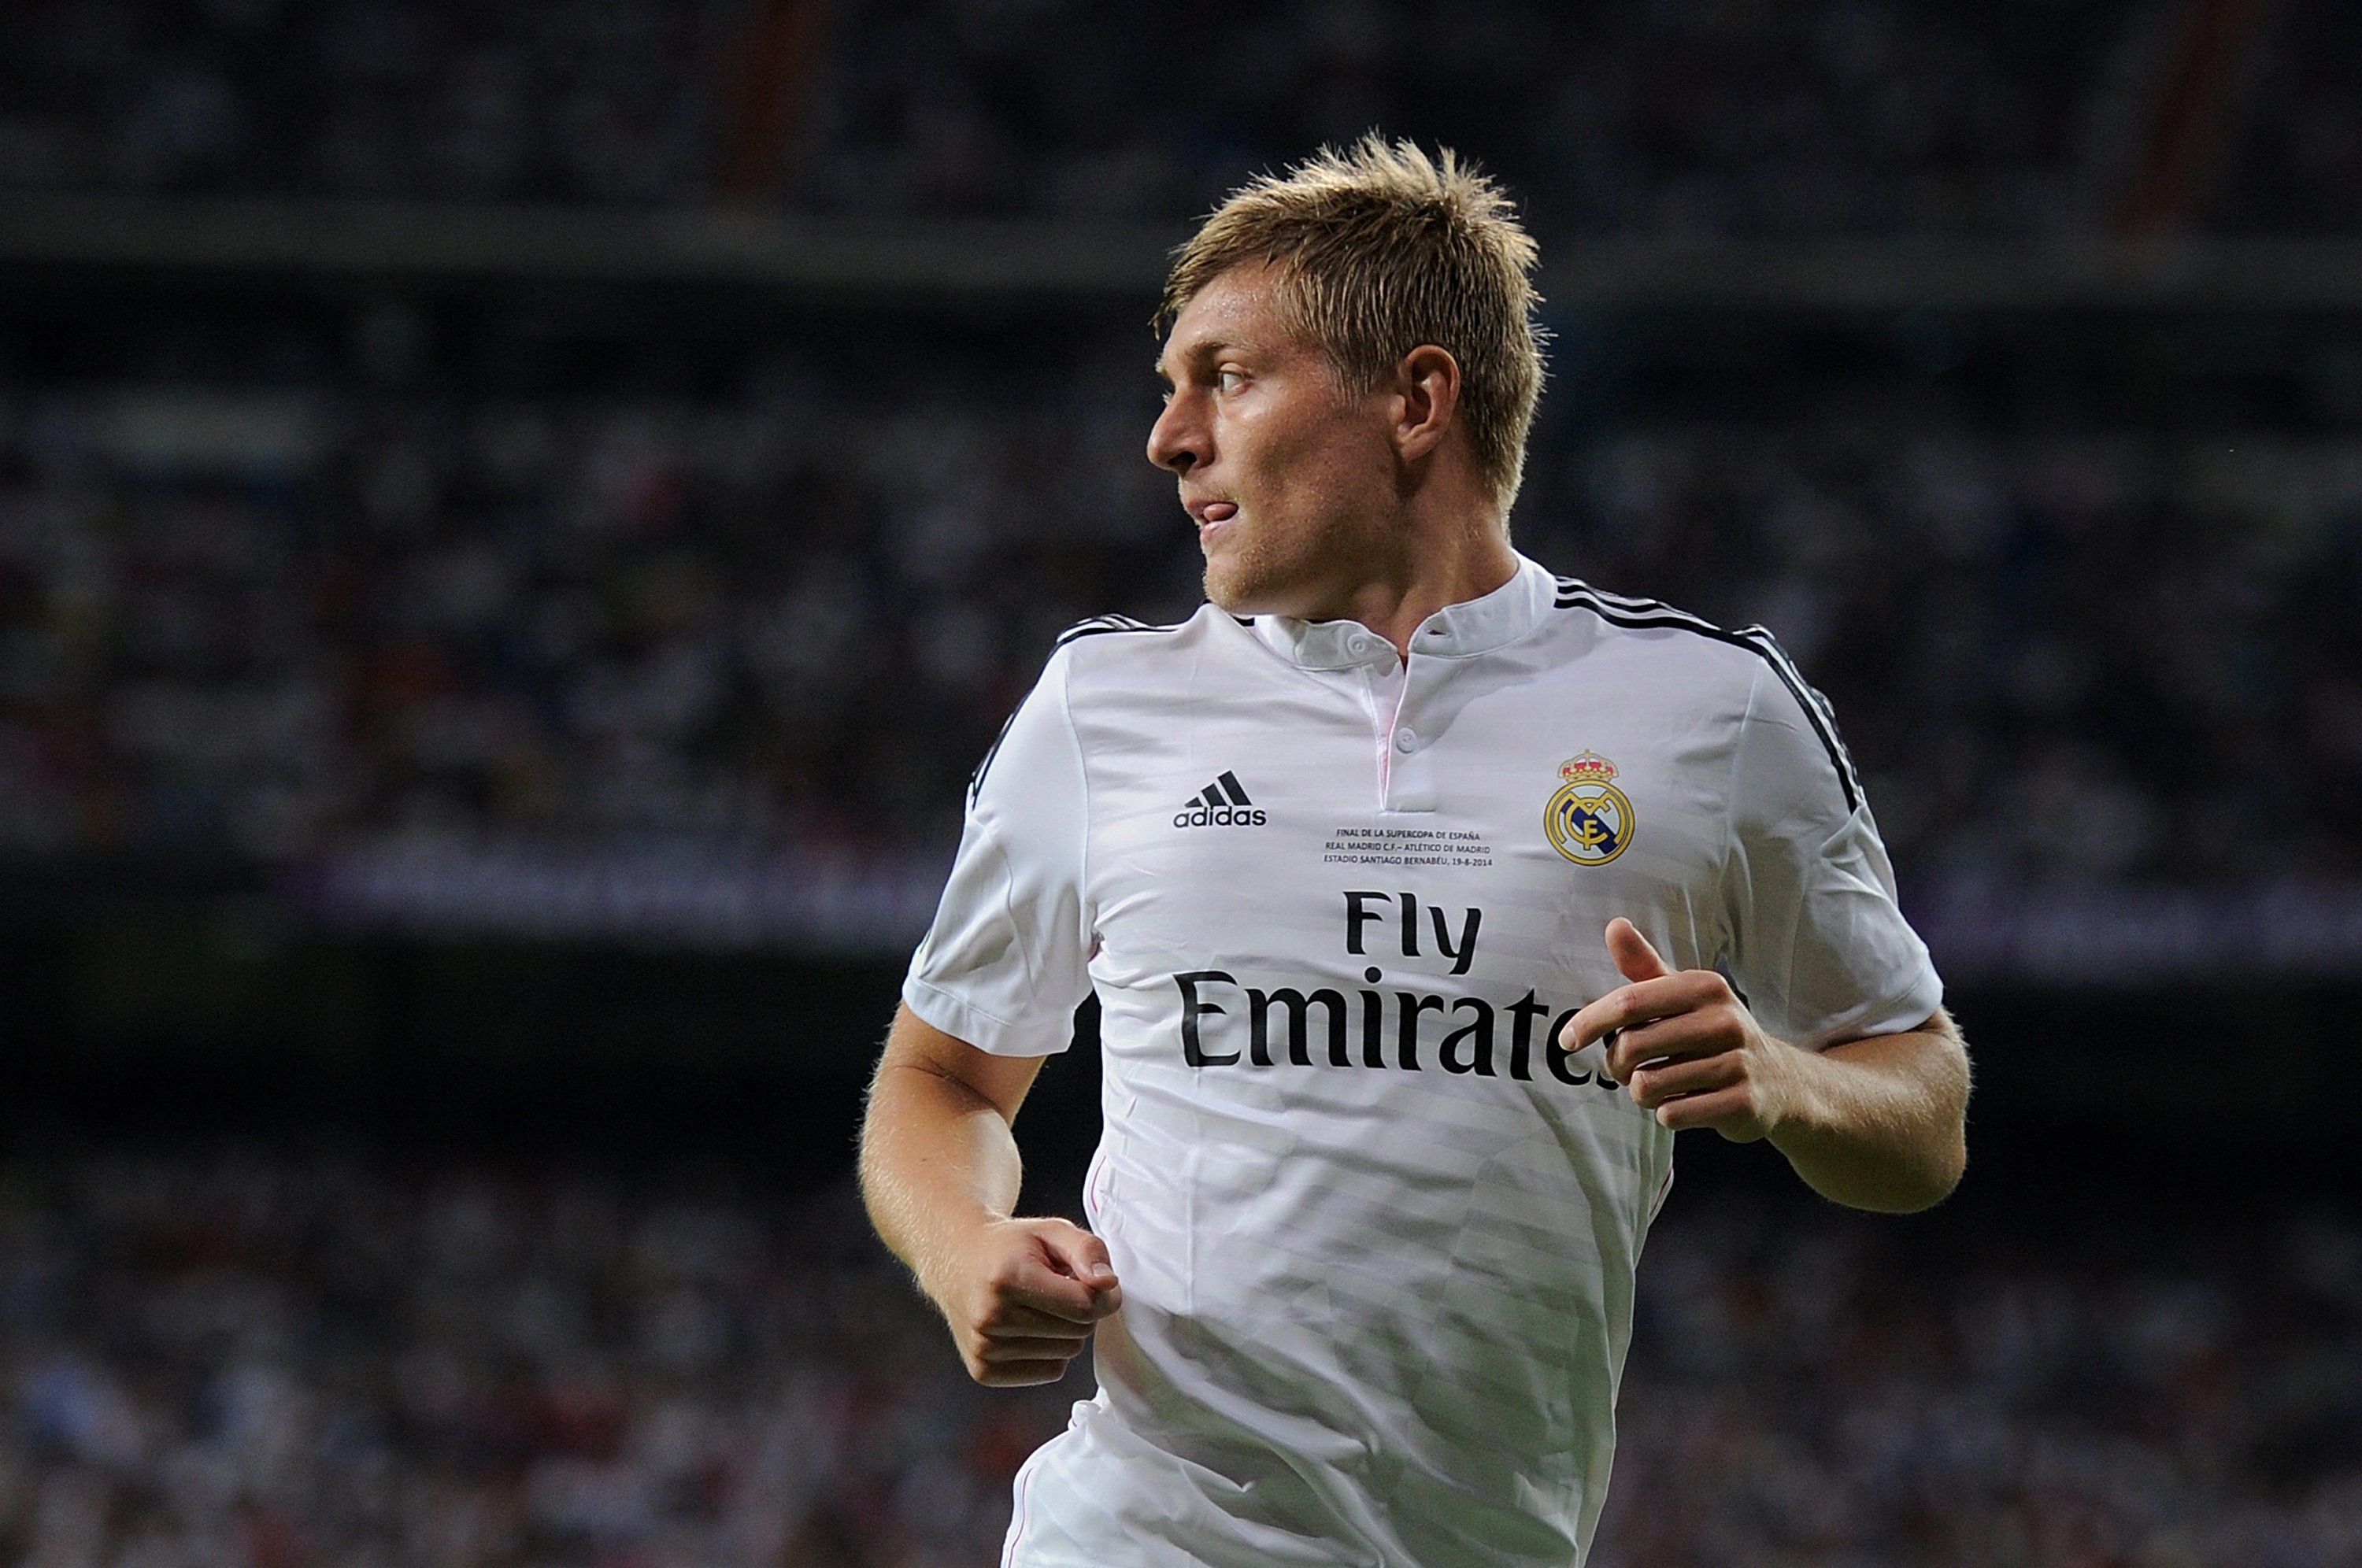 Chelsea transfer news: Will Chelsea sign Real Madrid's Toni Kroos this summer?